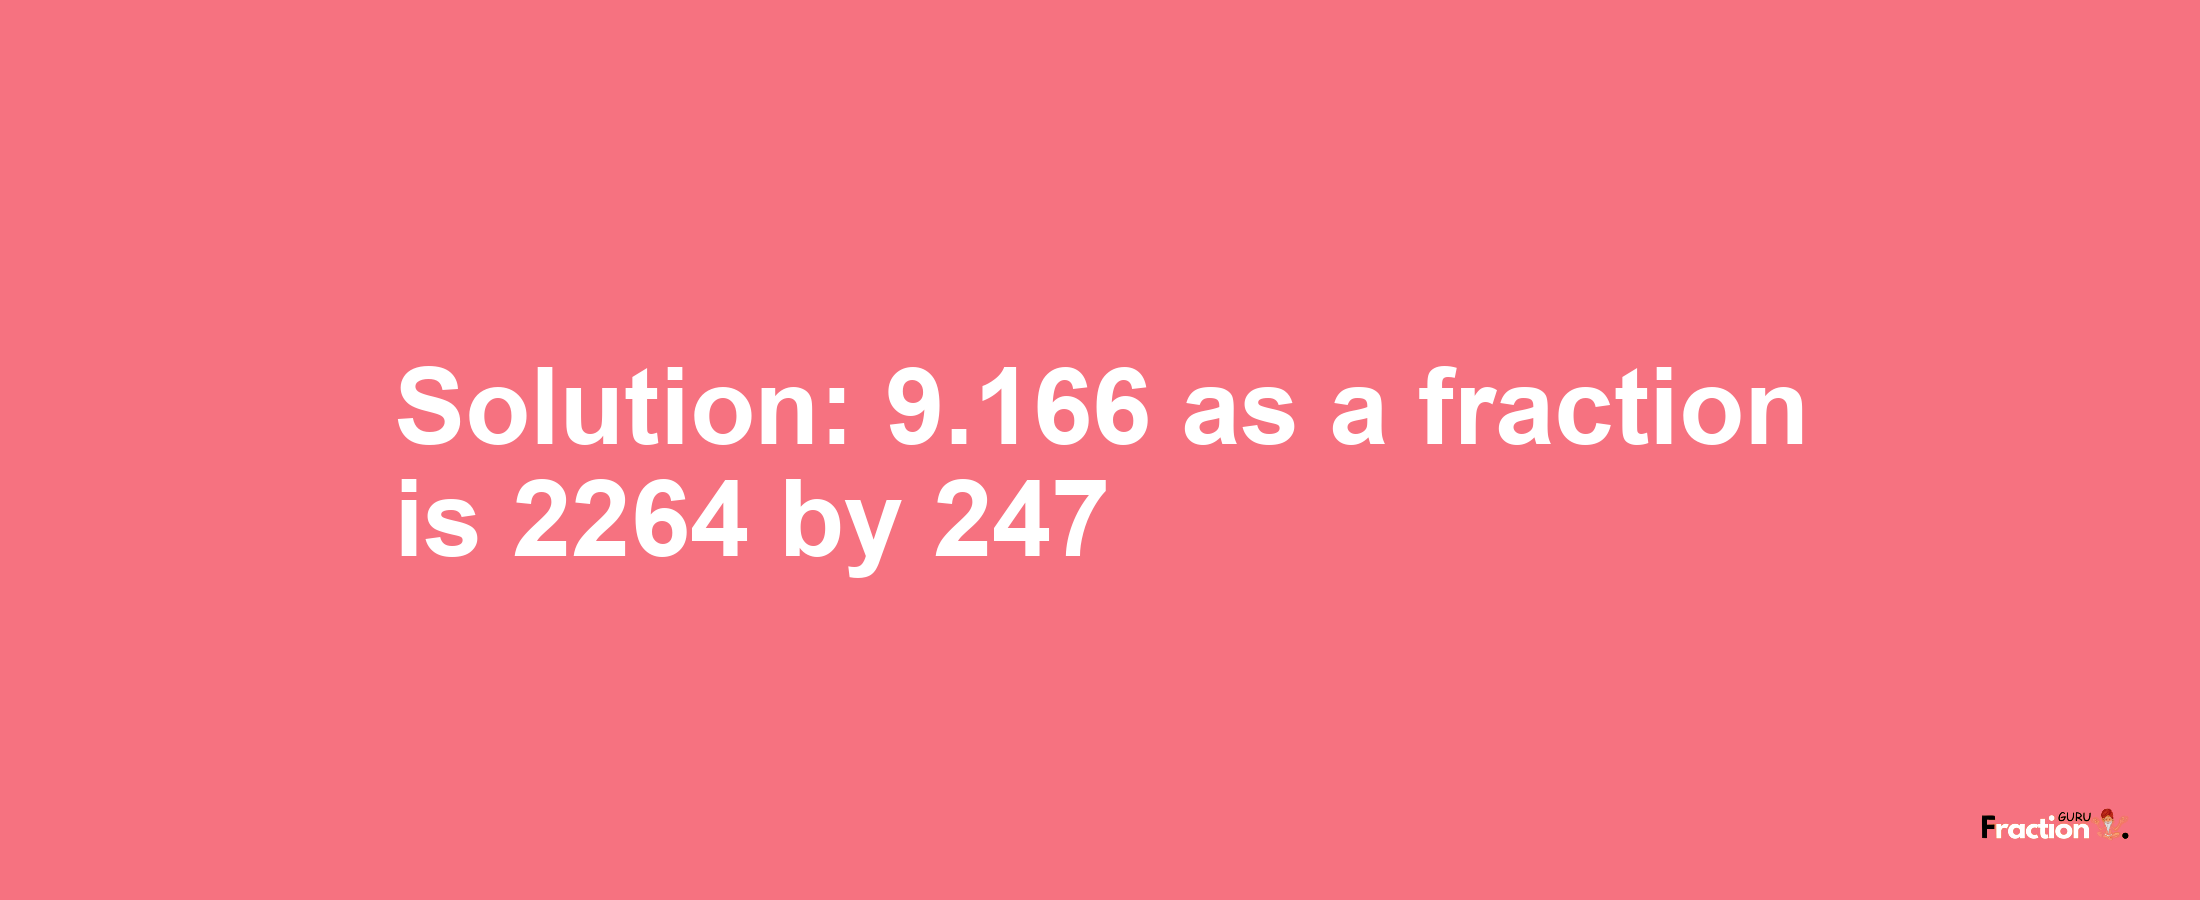 Solution:9.166 as a fraction is 2264/247